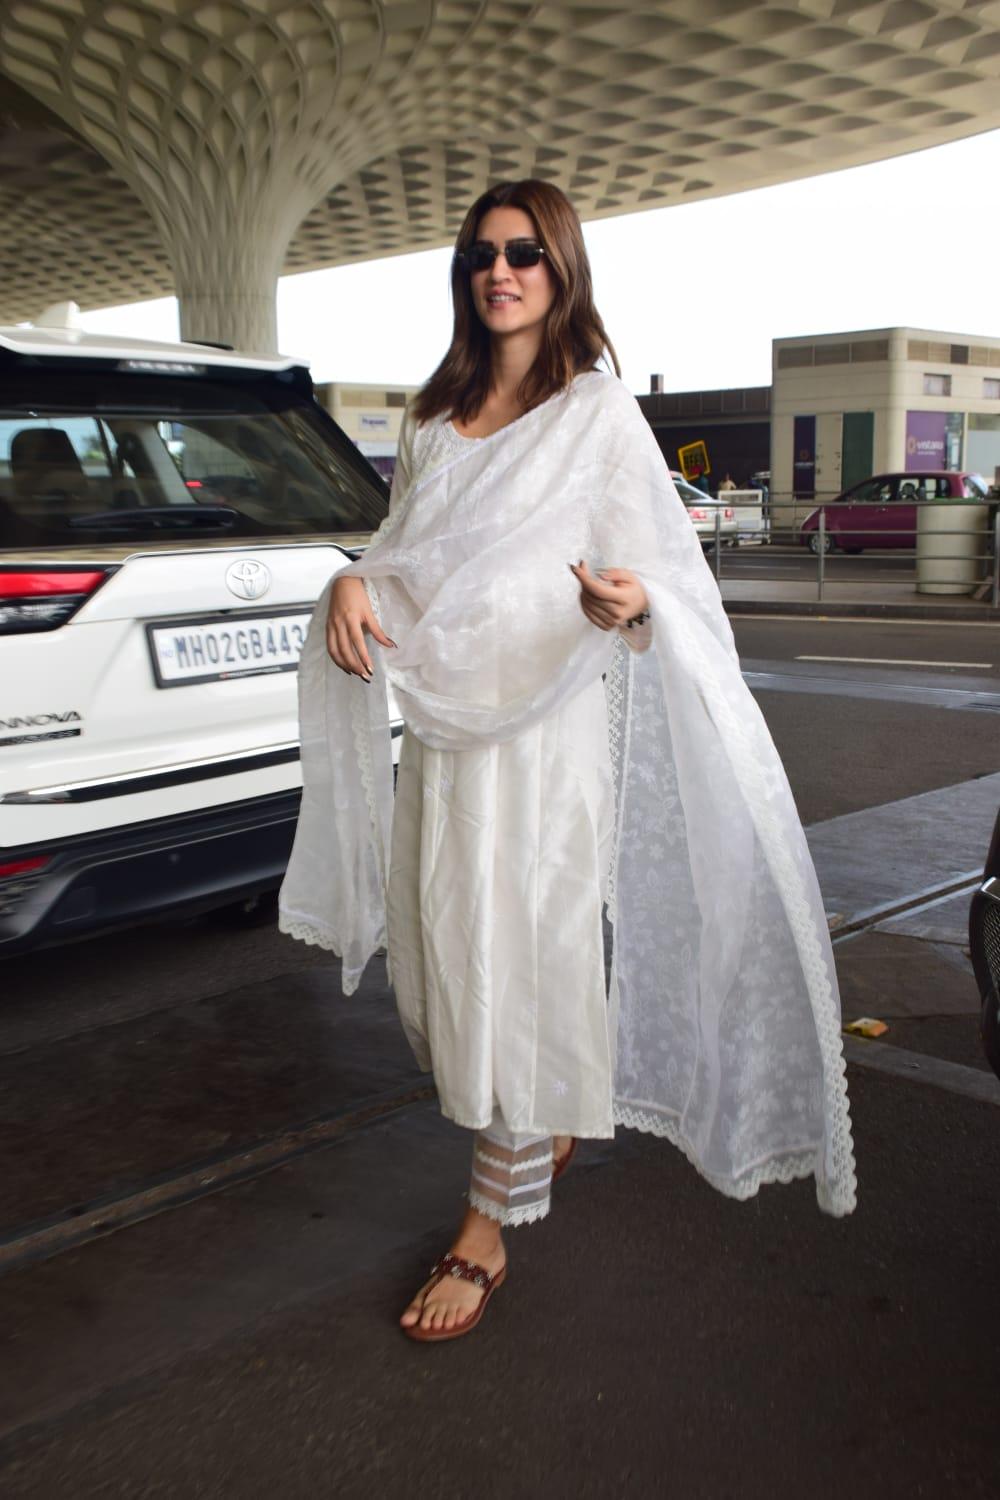 Kriti Sanon aced her airport look in a white anarkali suit